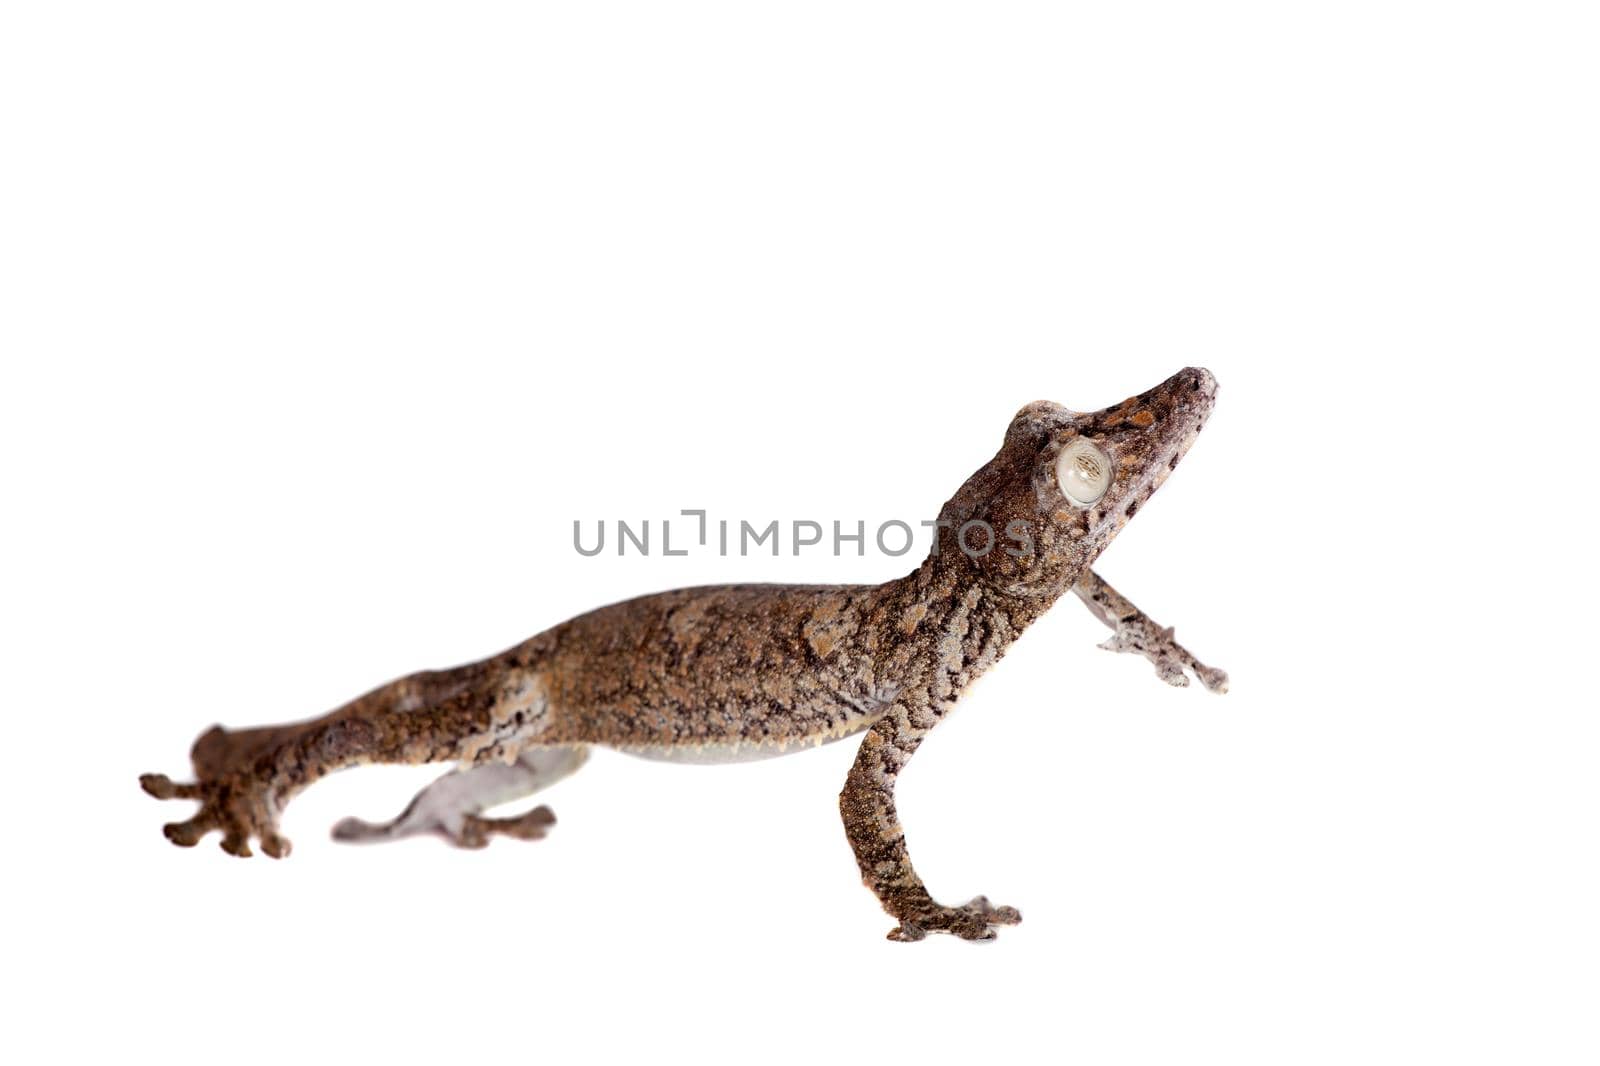 Giant leaf tailed gecko on white by RosaJay